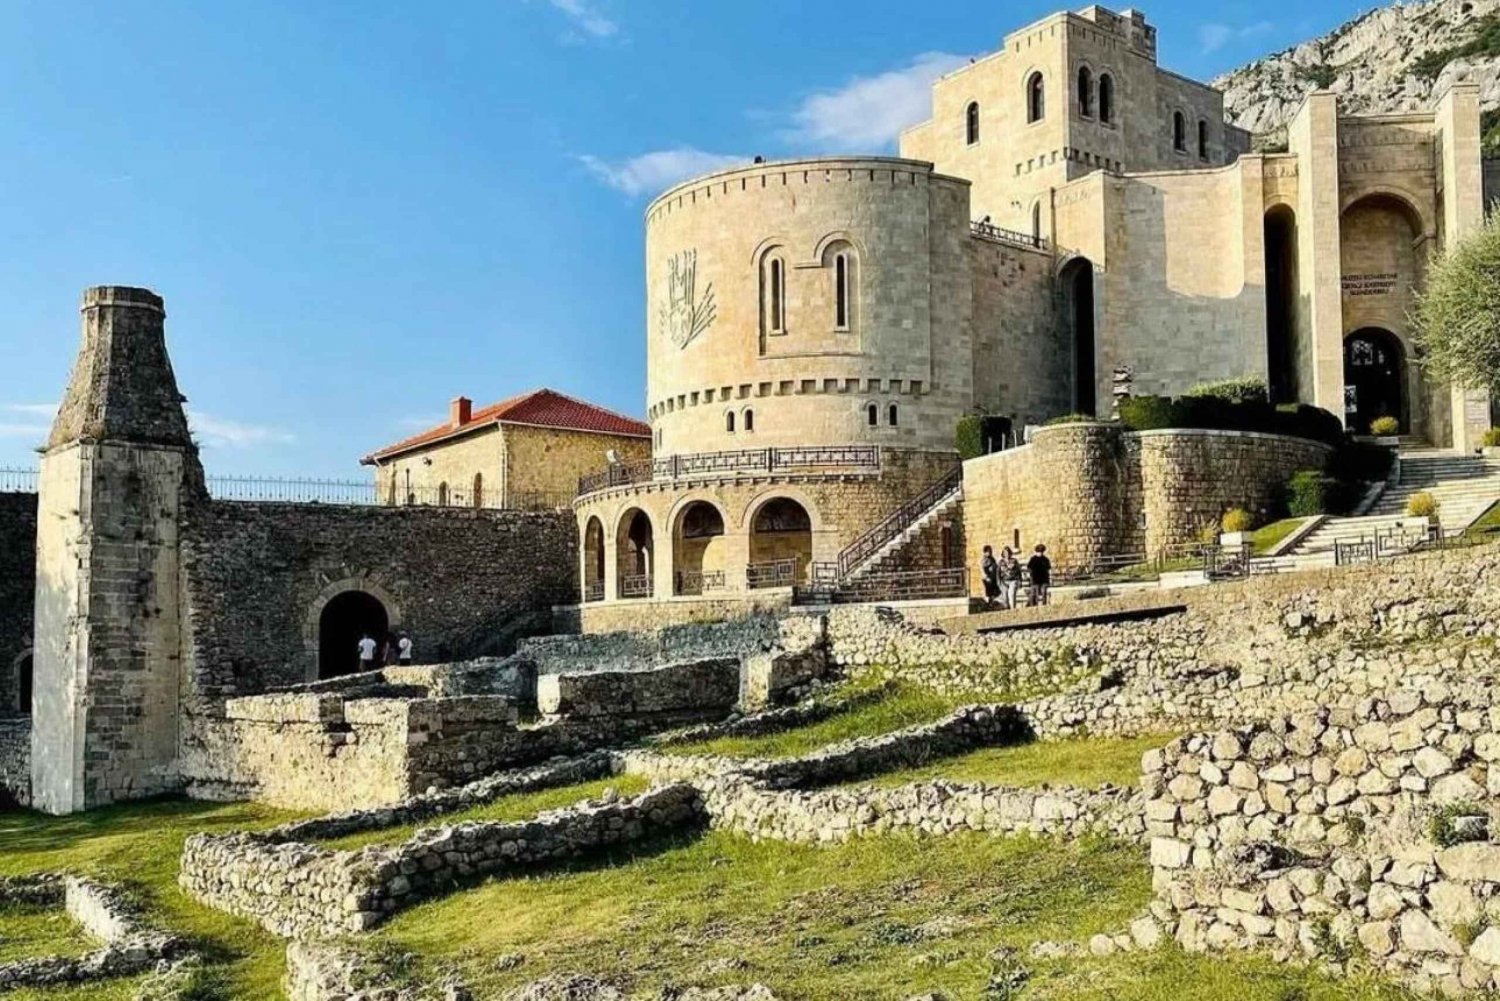 Day trip to the fortress of Kruja